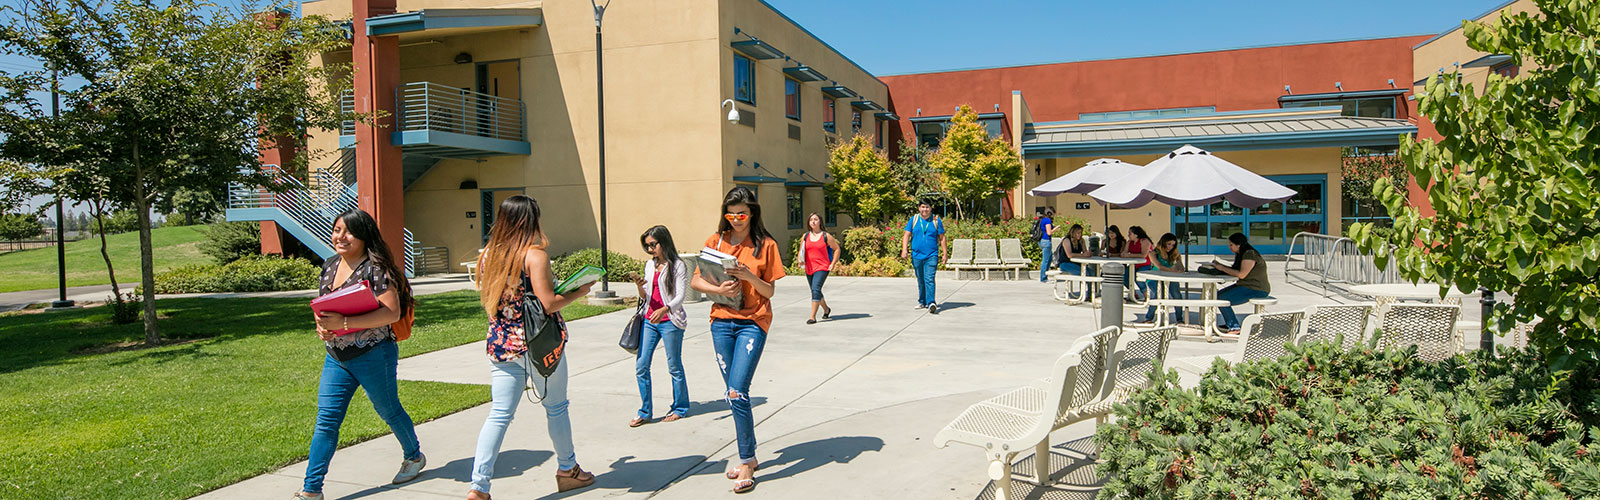 Residence Hall Student | Reedley College